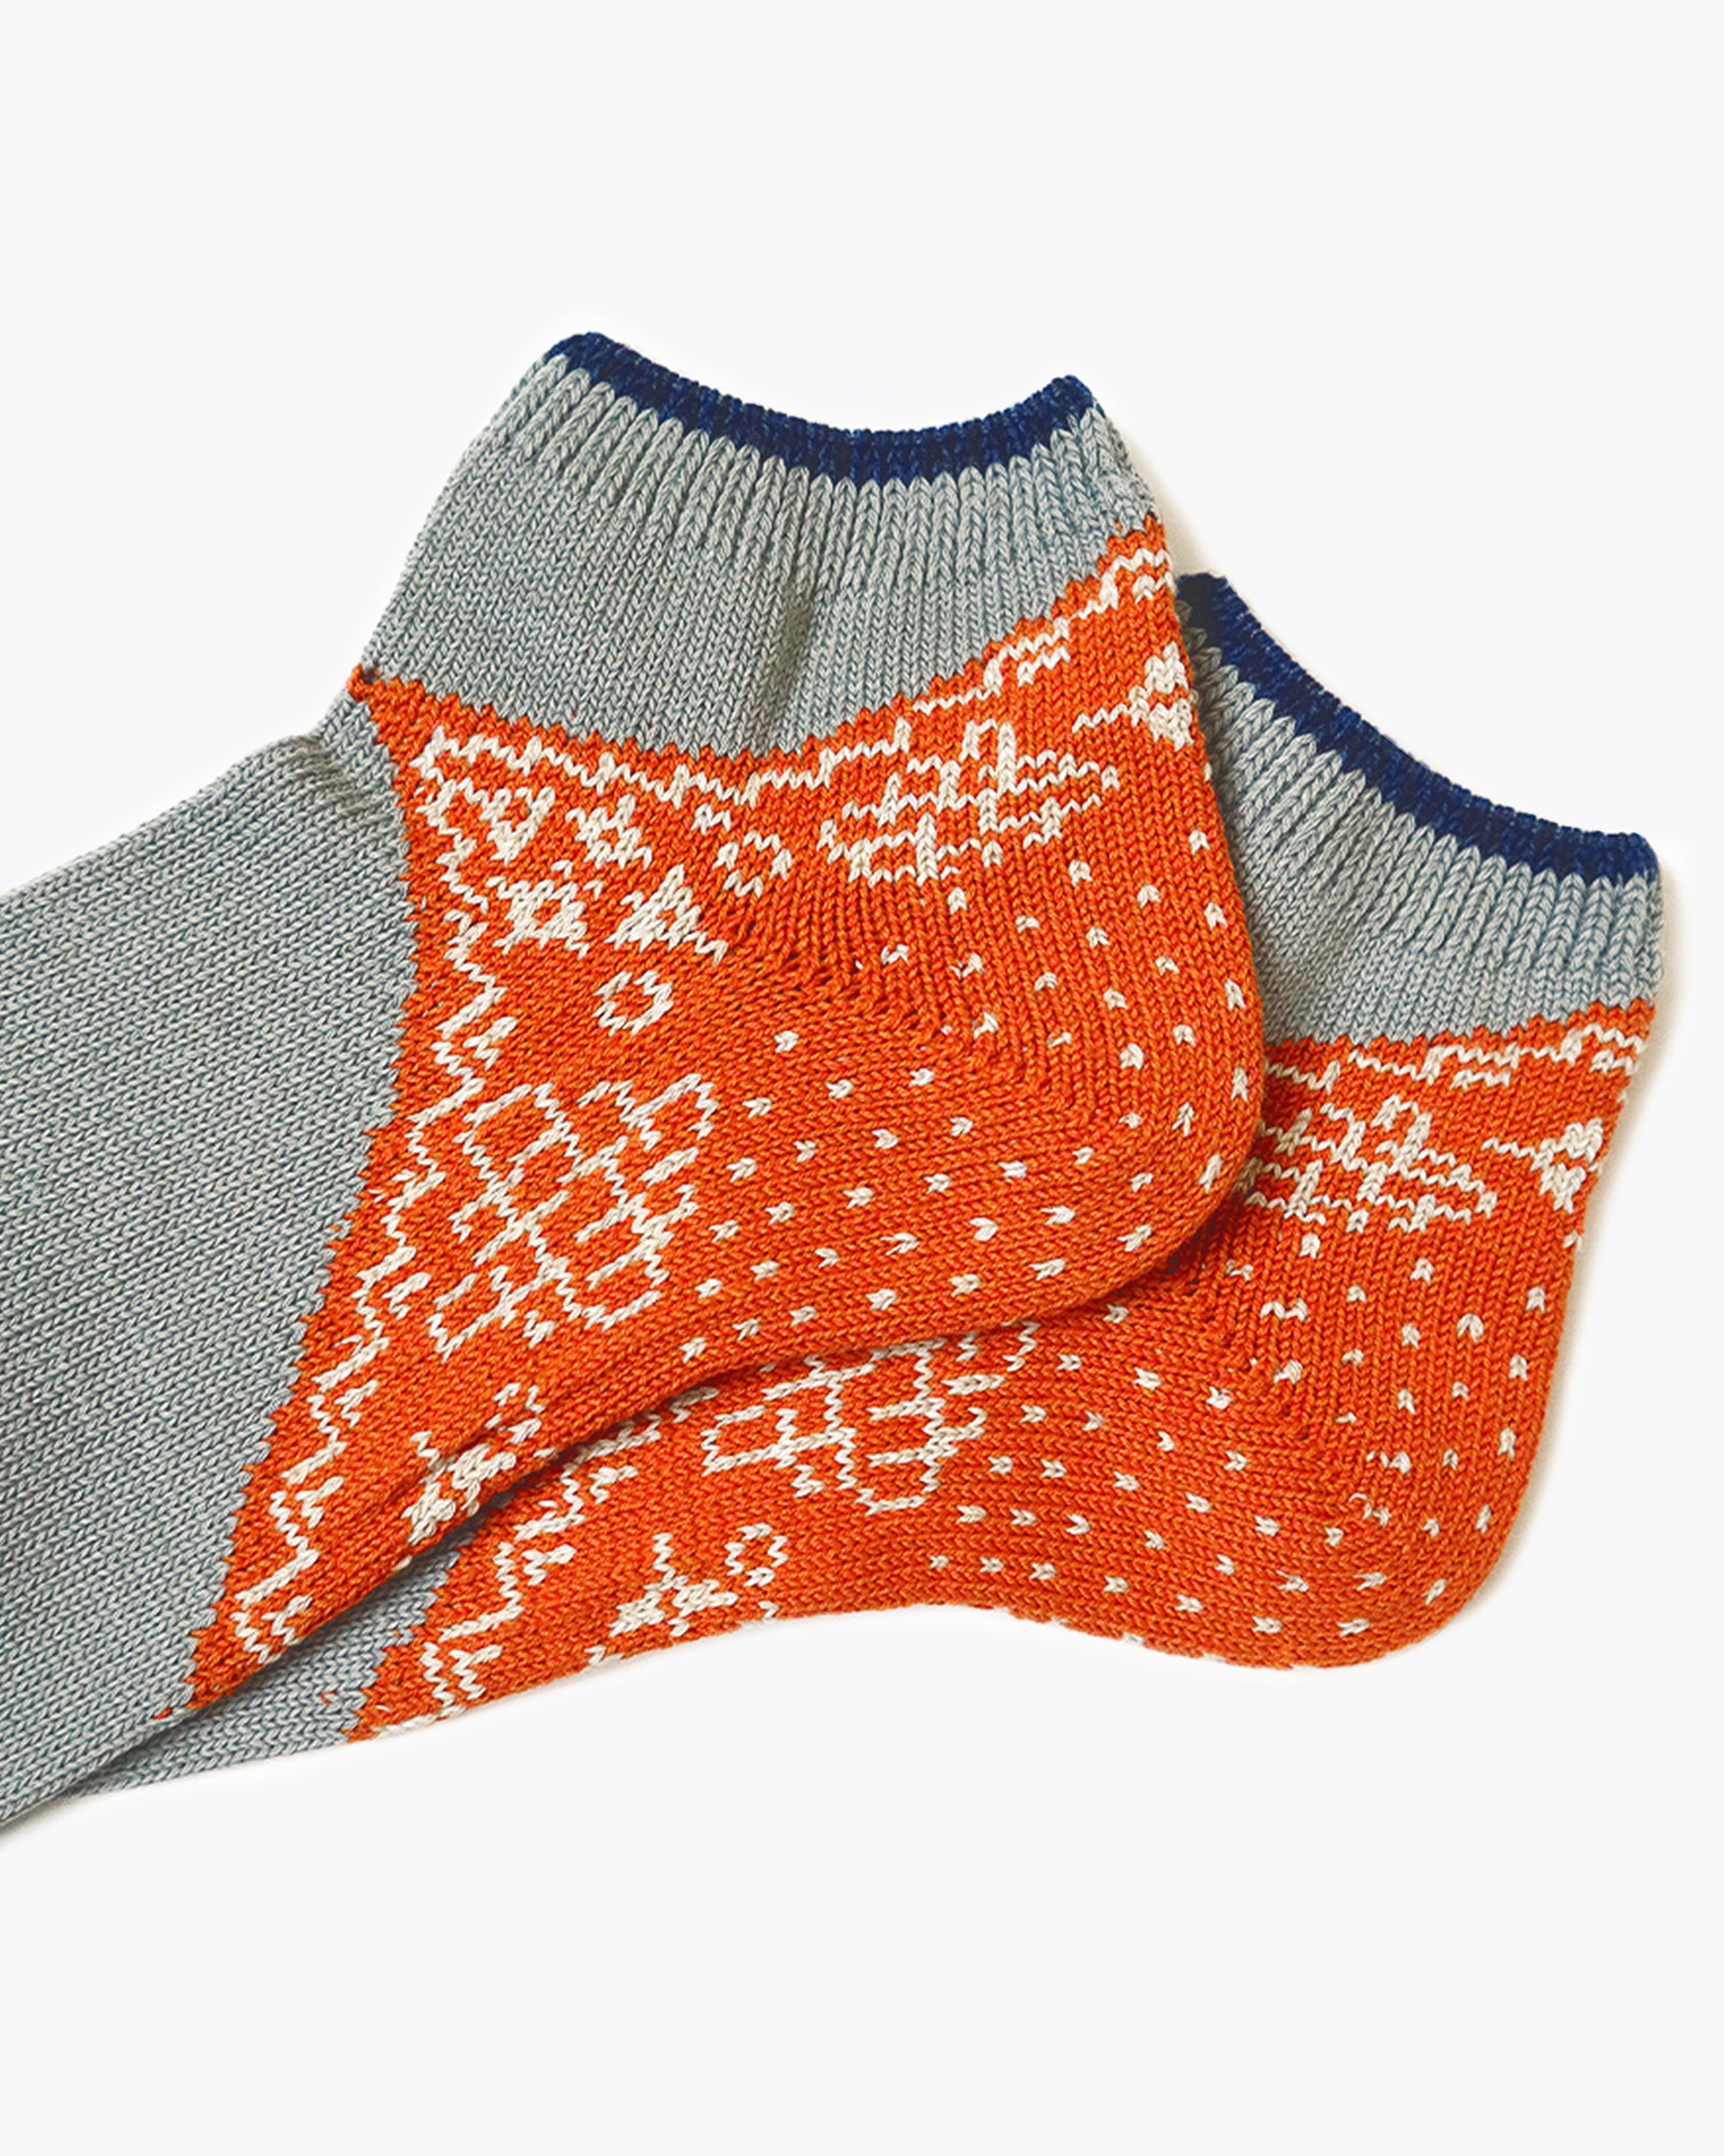 A pair of moderately thick ankle socks with an eye-catching bandana motif on the heel.